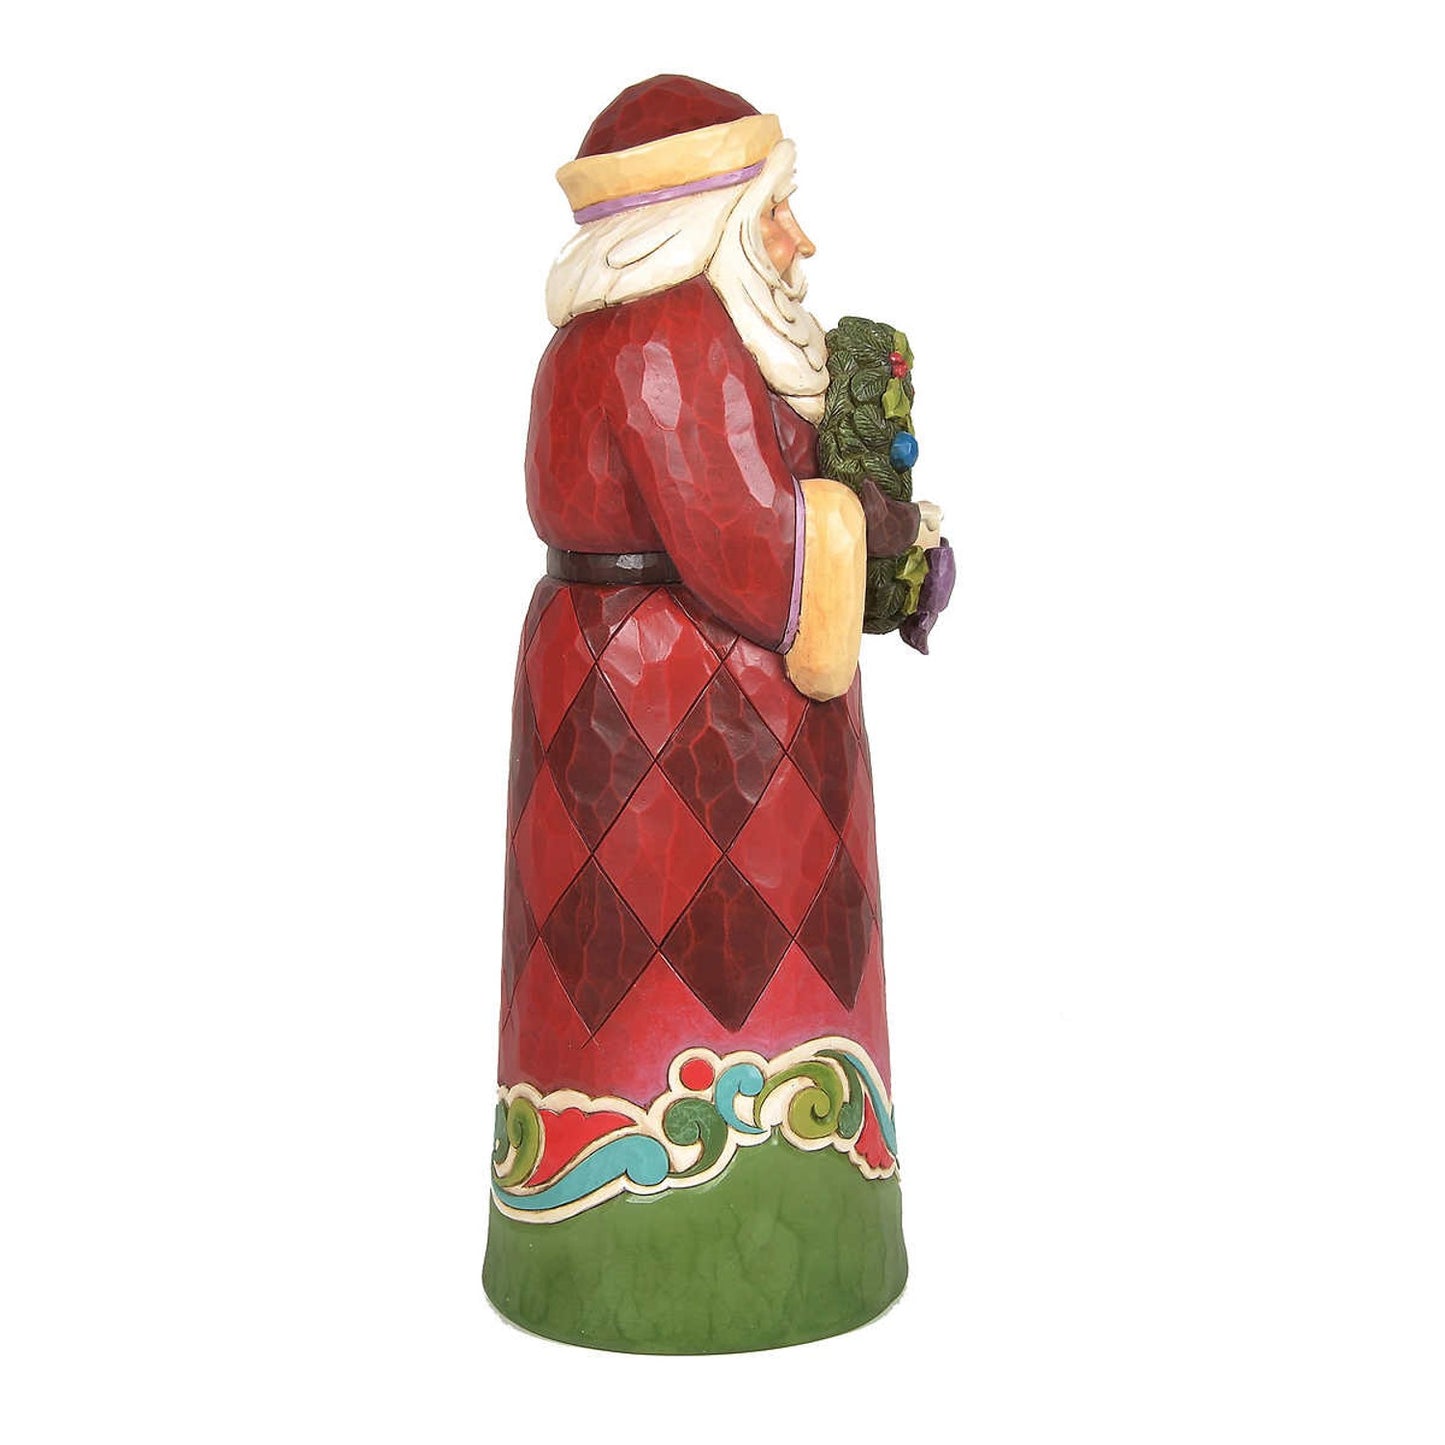 Jim Shore 20" Santa Statue with glowing candle Hand crafted & painted Christmas